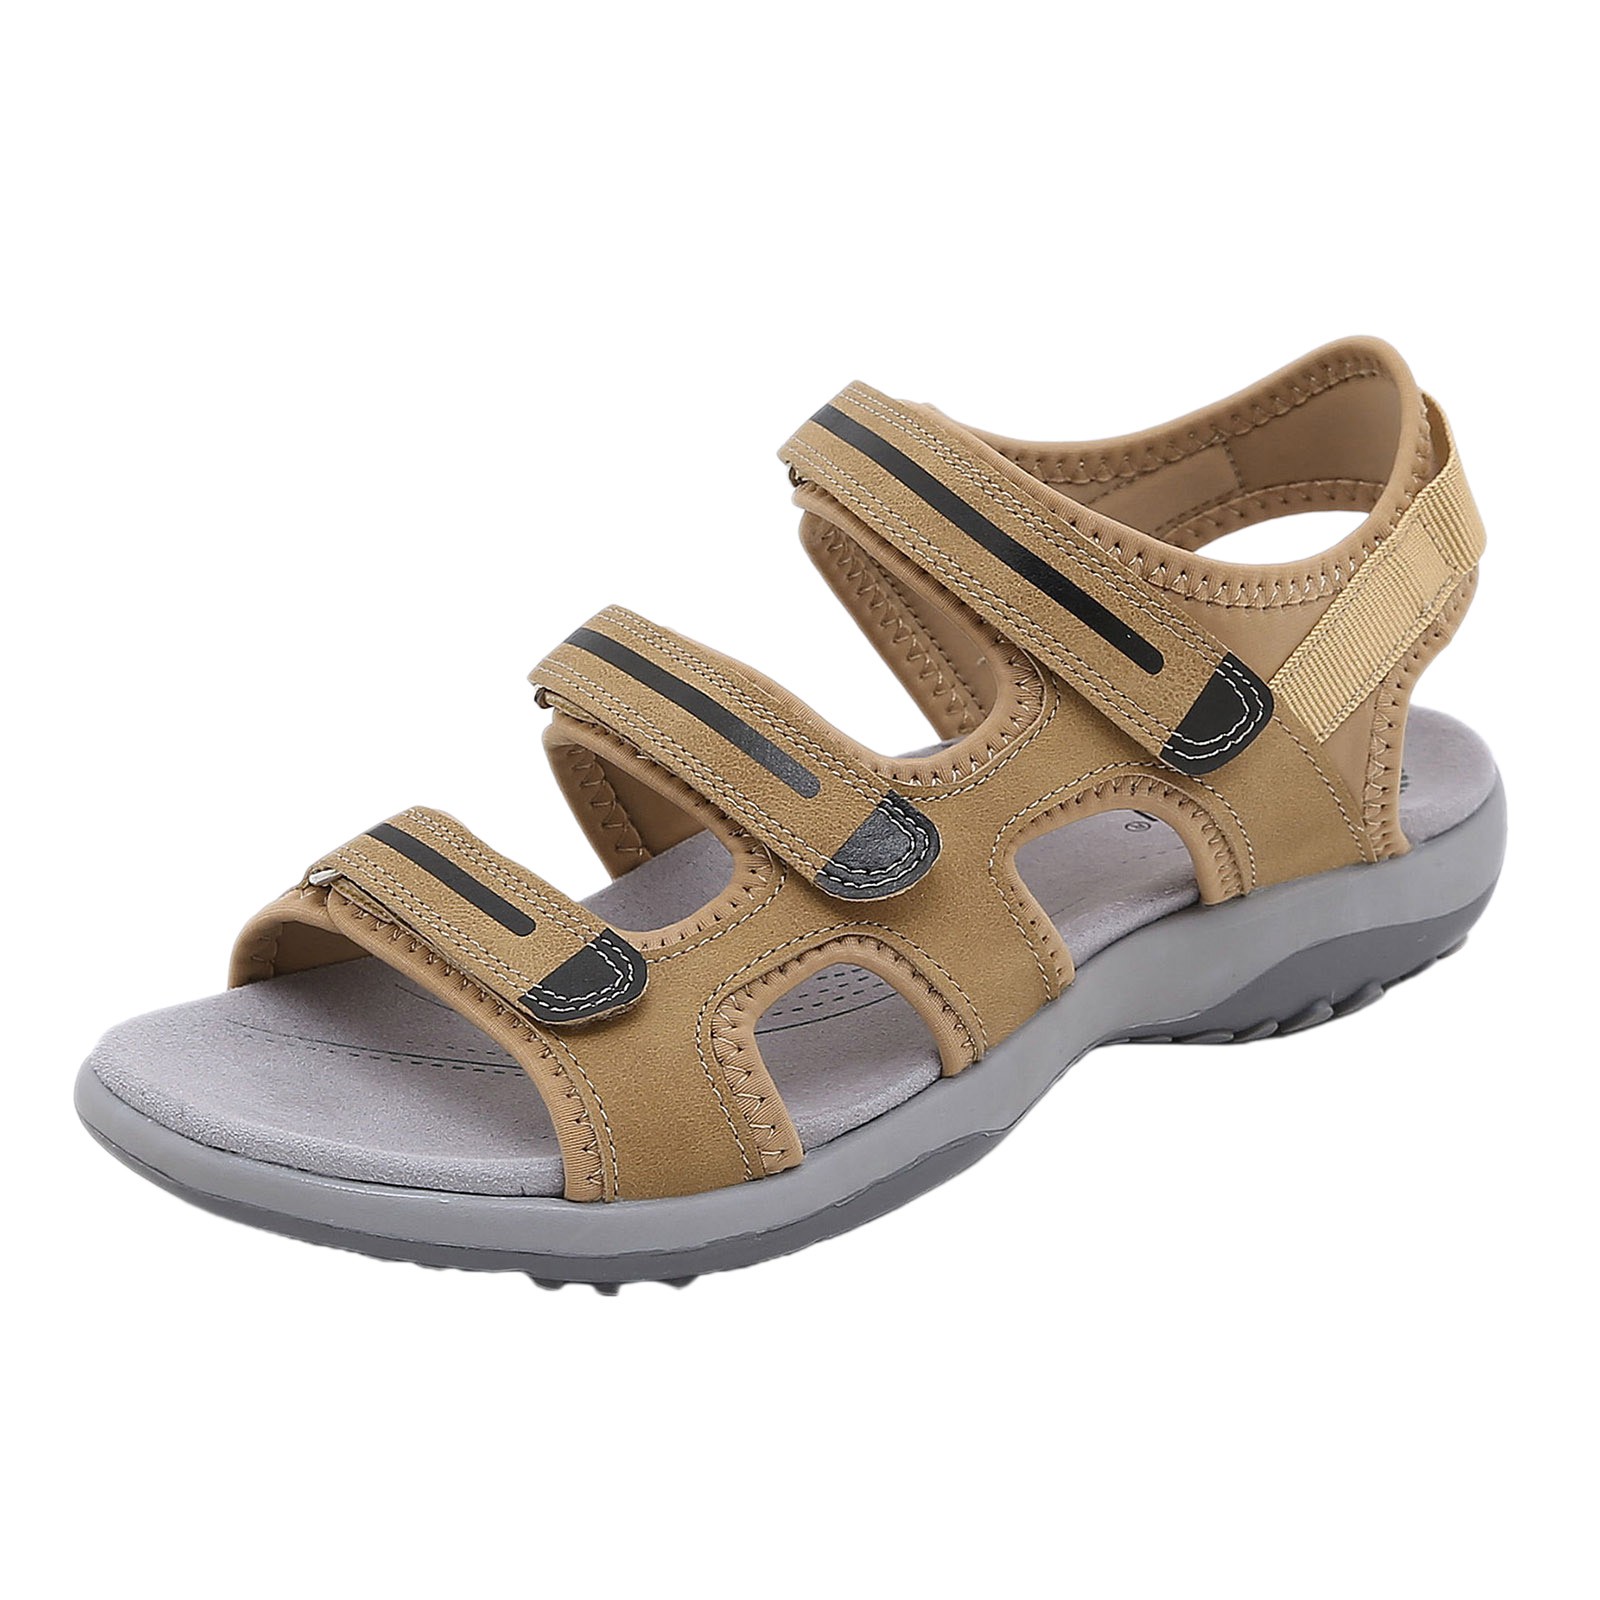 Sandals Women,Women's Sports Style Sandals Comfortable and Wear Flat ...